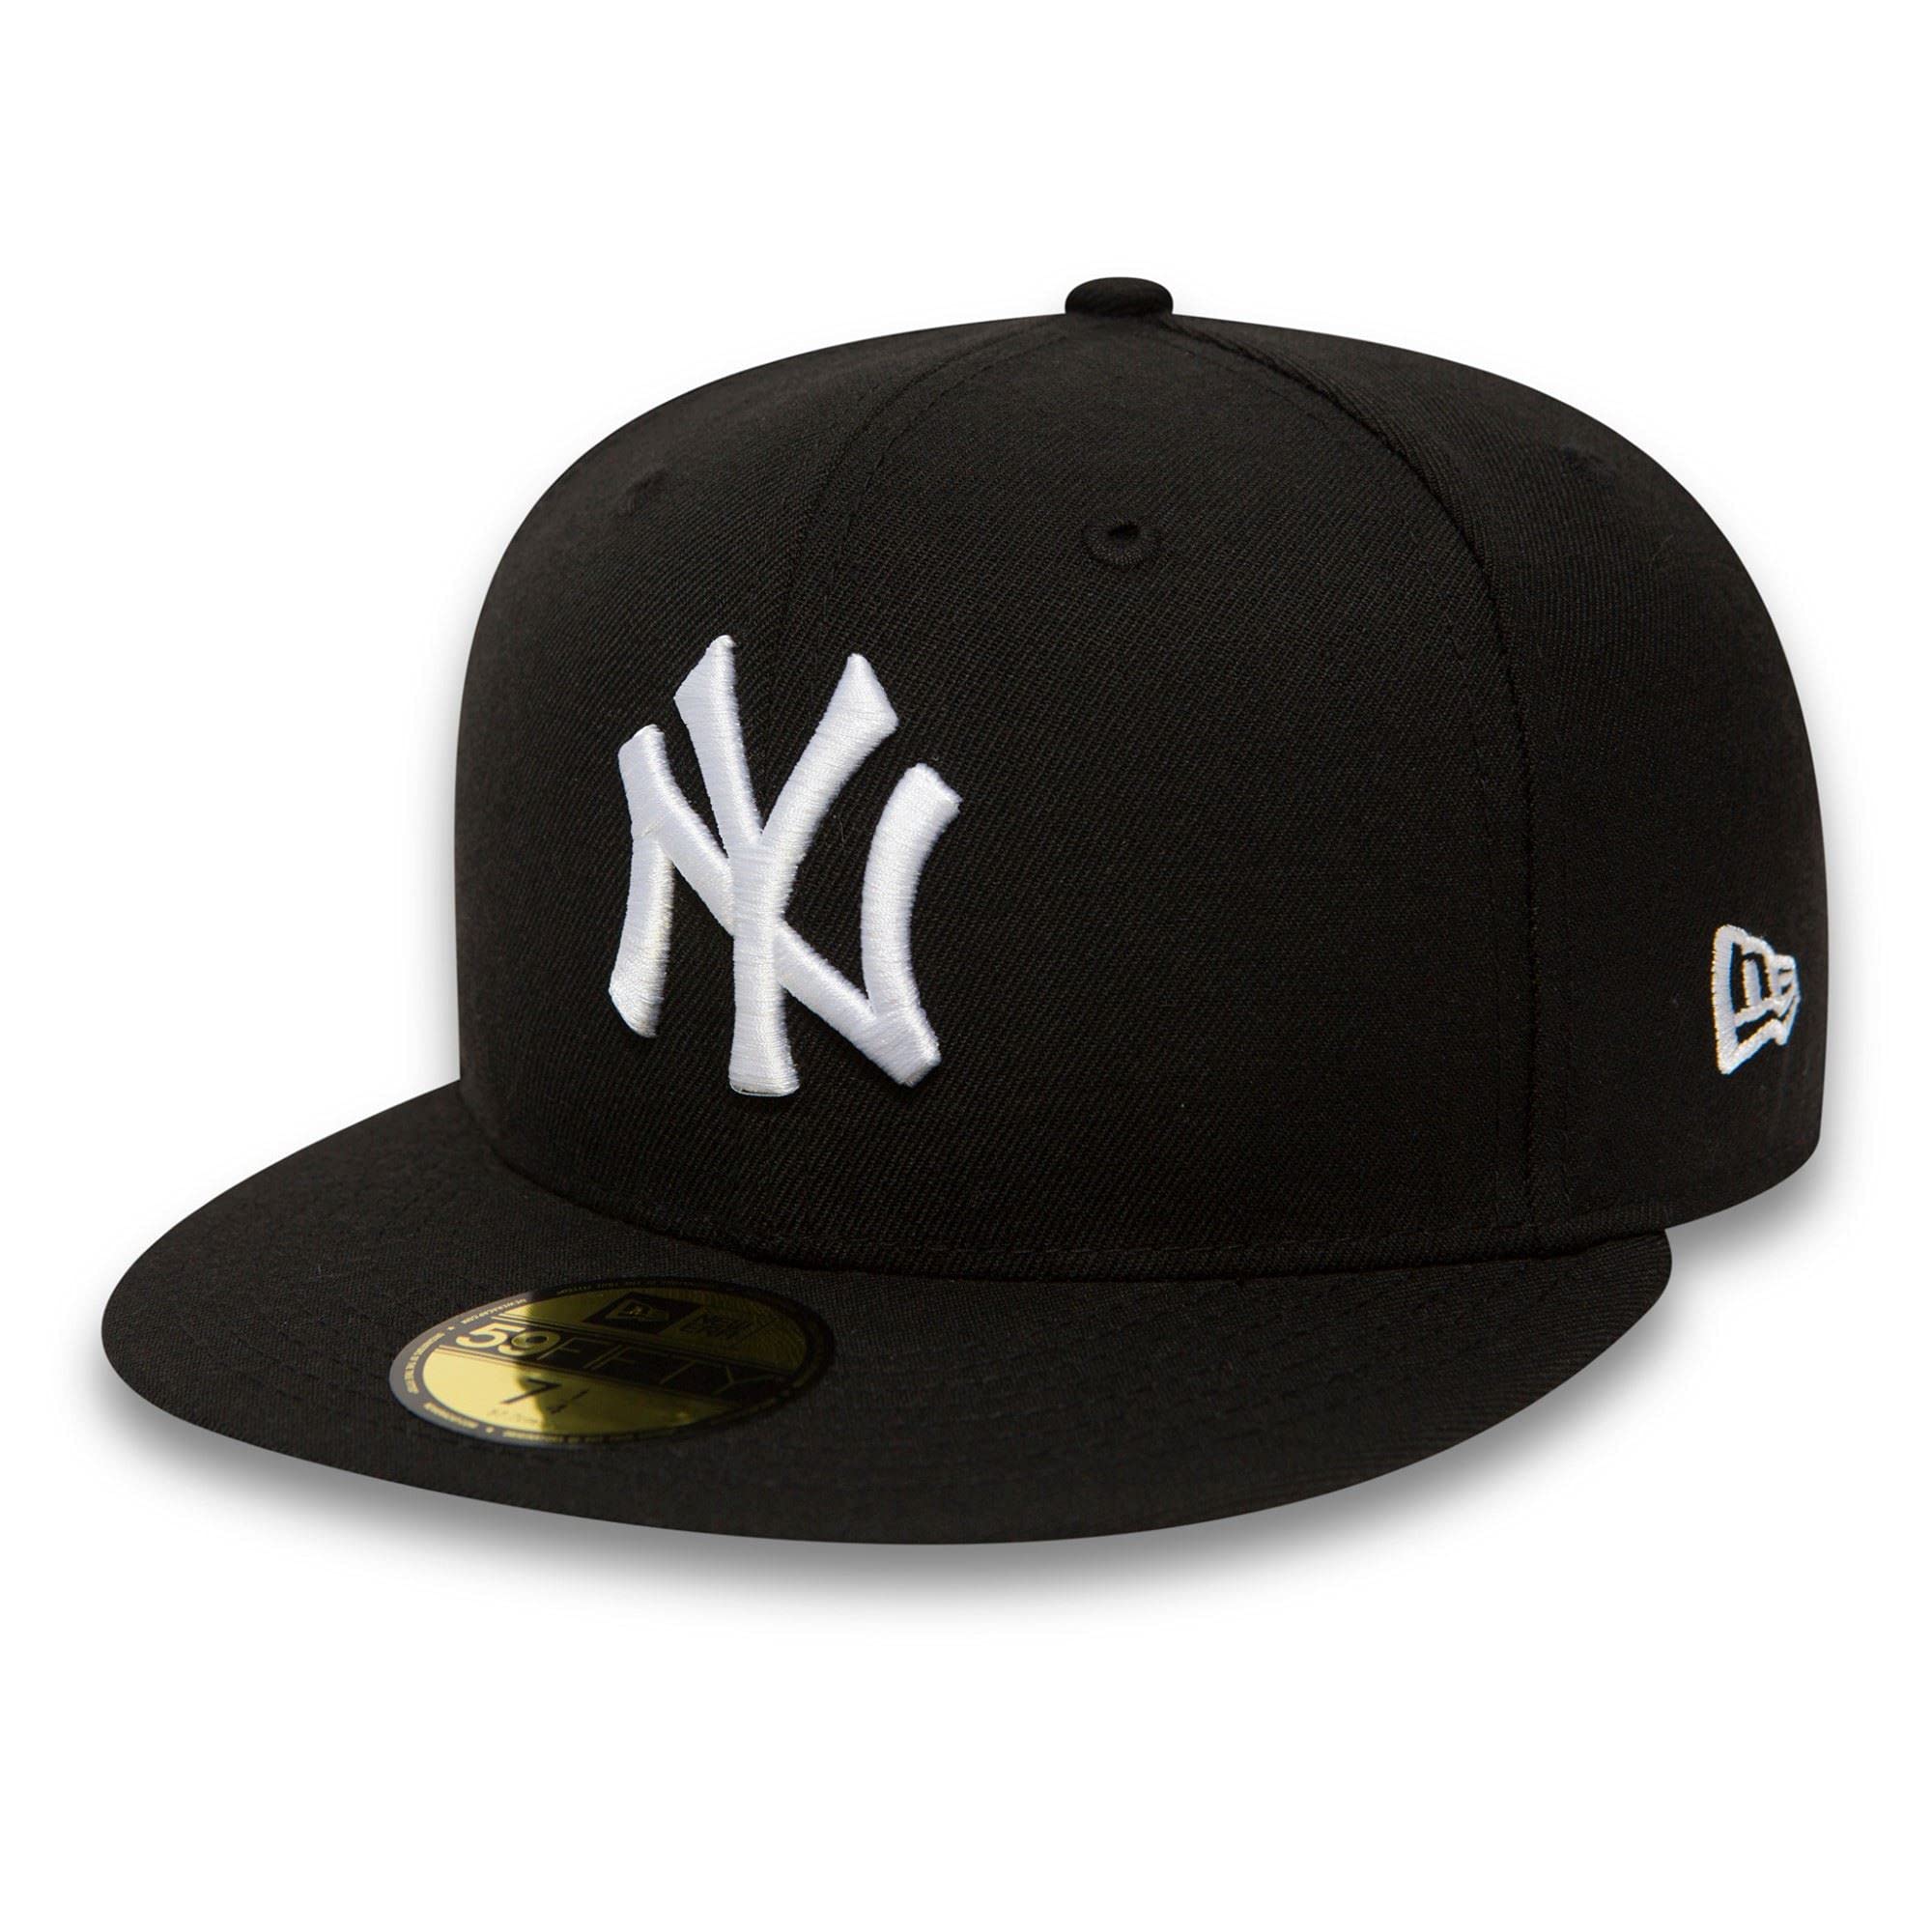 New Era releases new set of MLB caps that receive mixed reaction